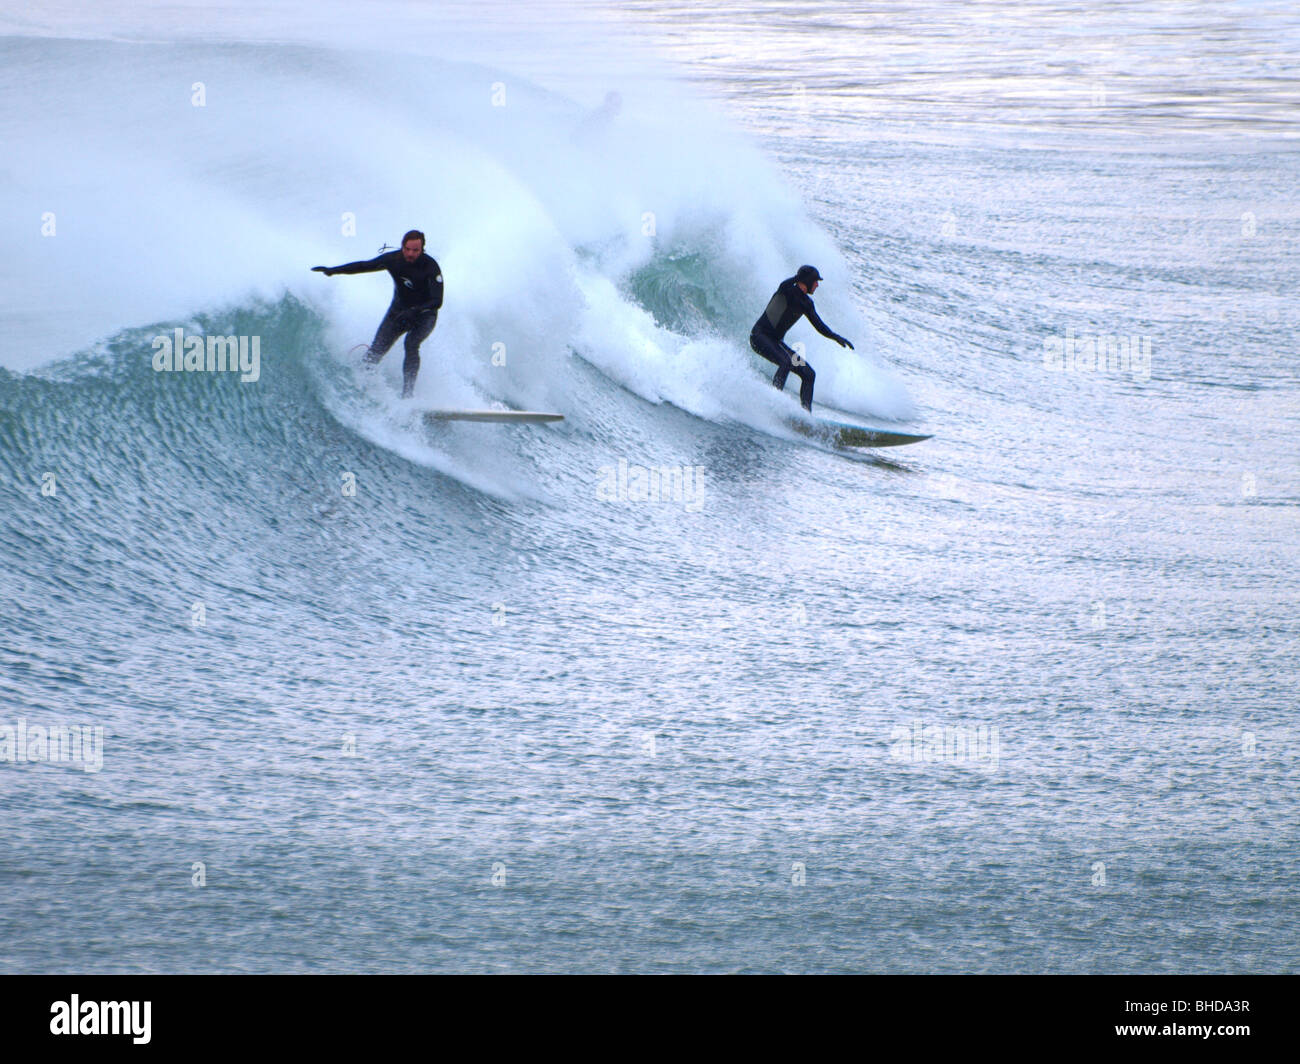 Two surfers on the same wave, Newquay, Cornwall Stock Photo